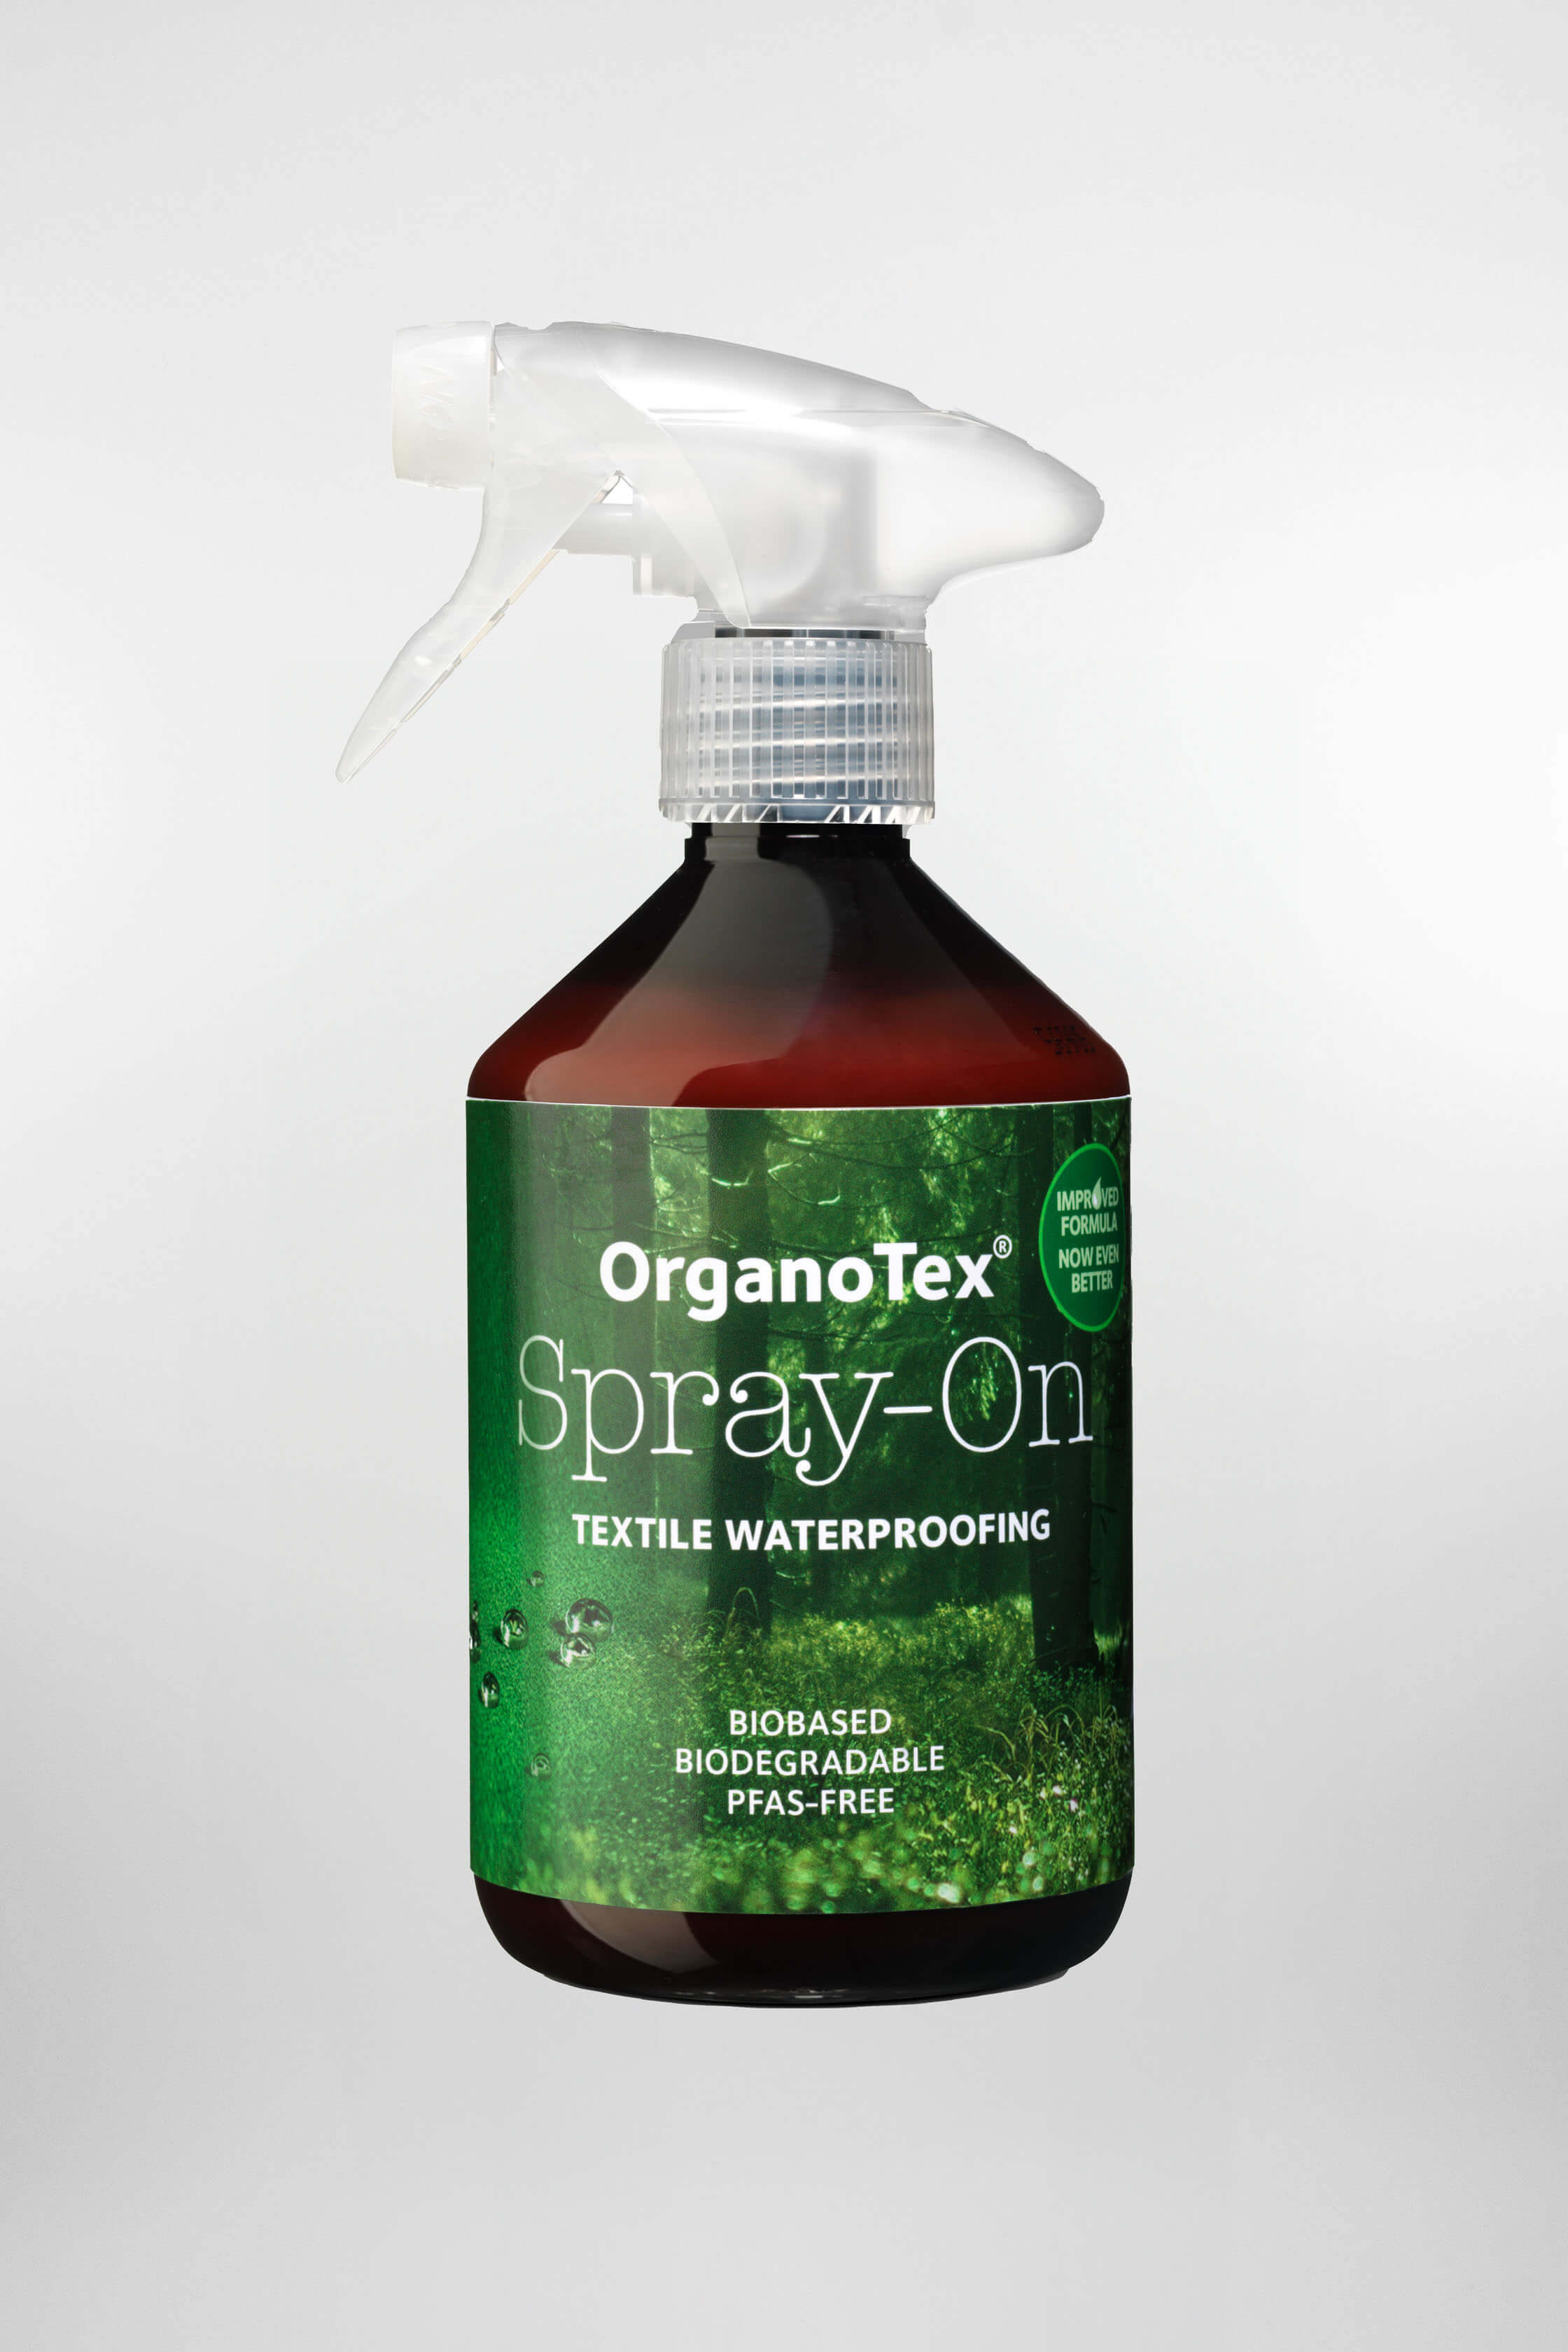 A picture of a spray bottle of Organotex spray-on textile waterproofing